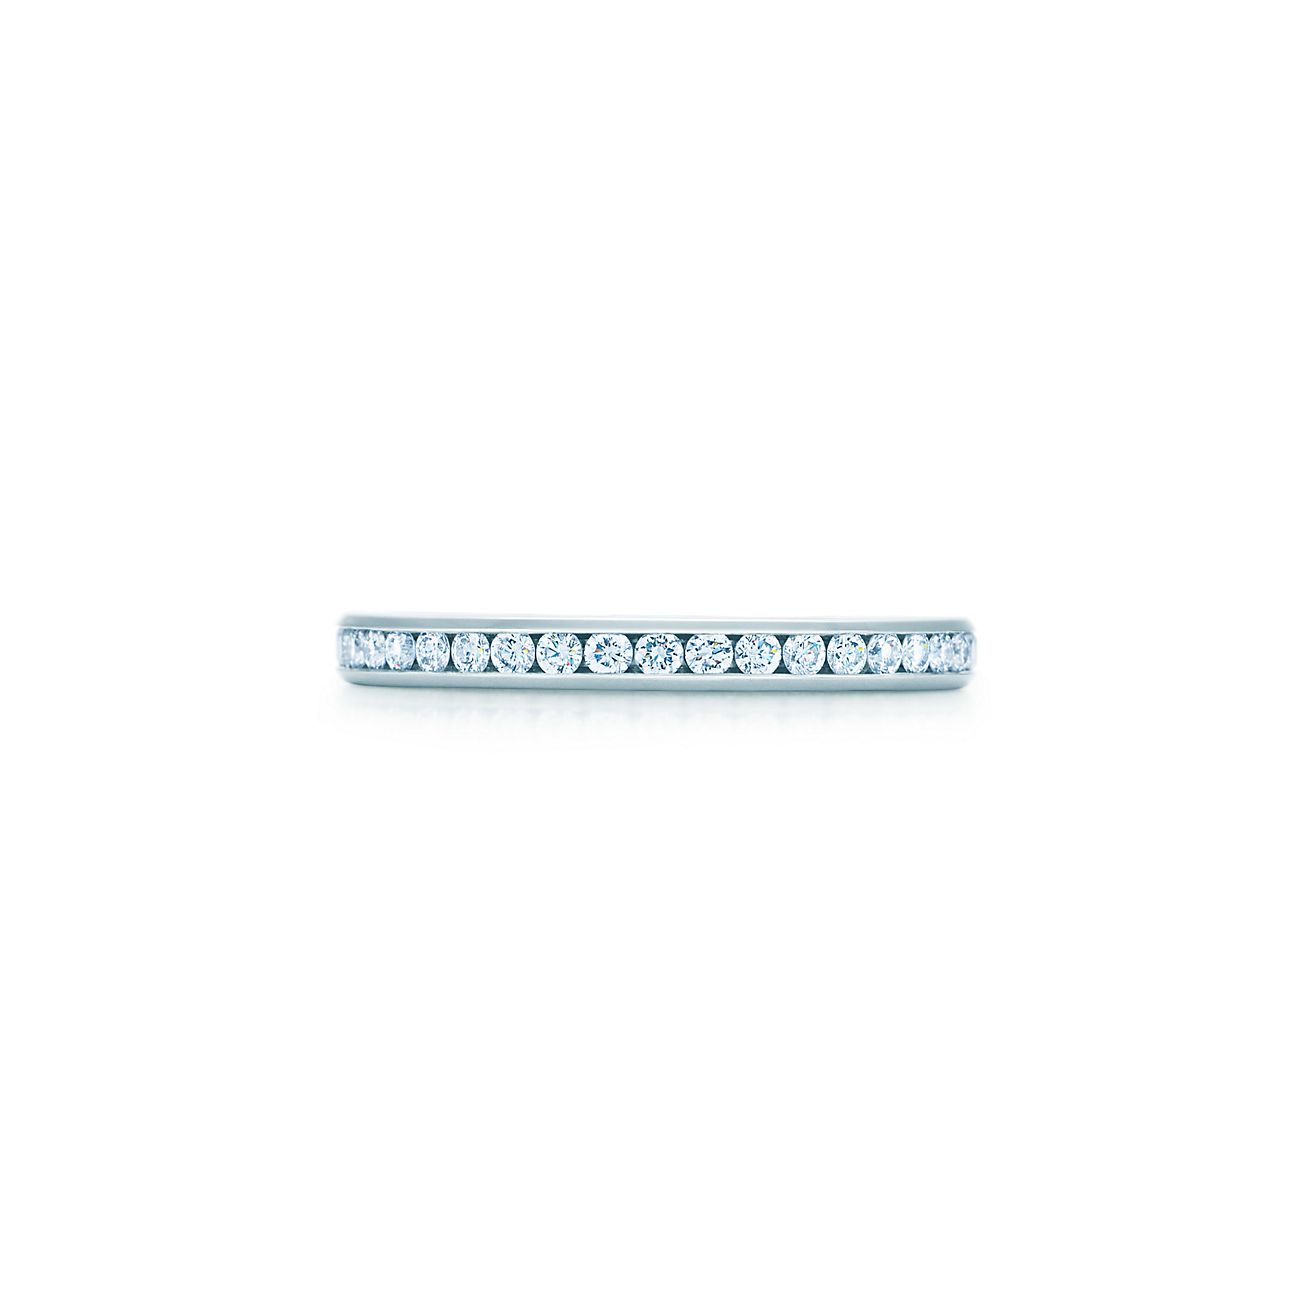 Tiffany® Setting Wedding Band in Platinum with a Full Circle of Diamonds, 2  mm | Tiffany & Co.